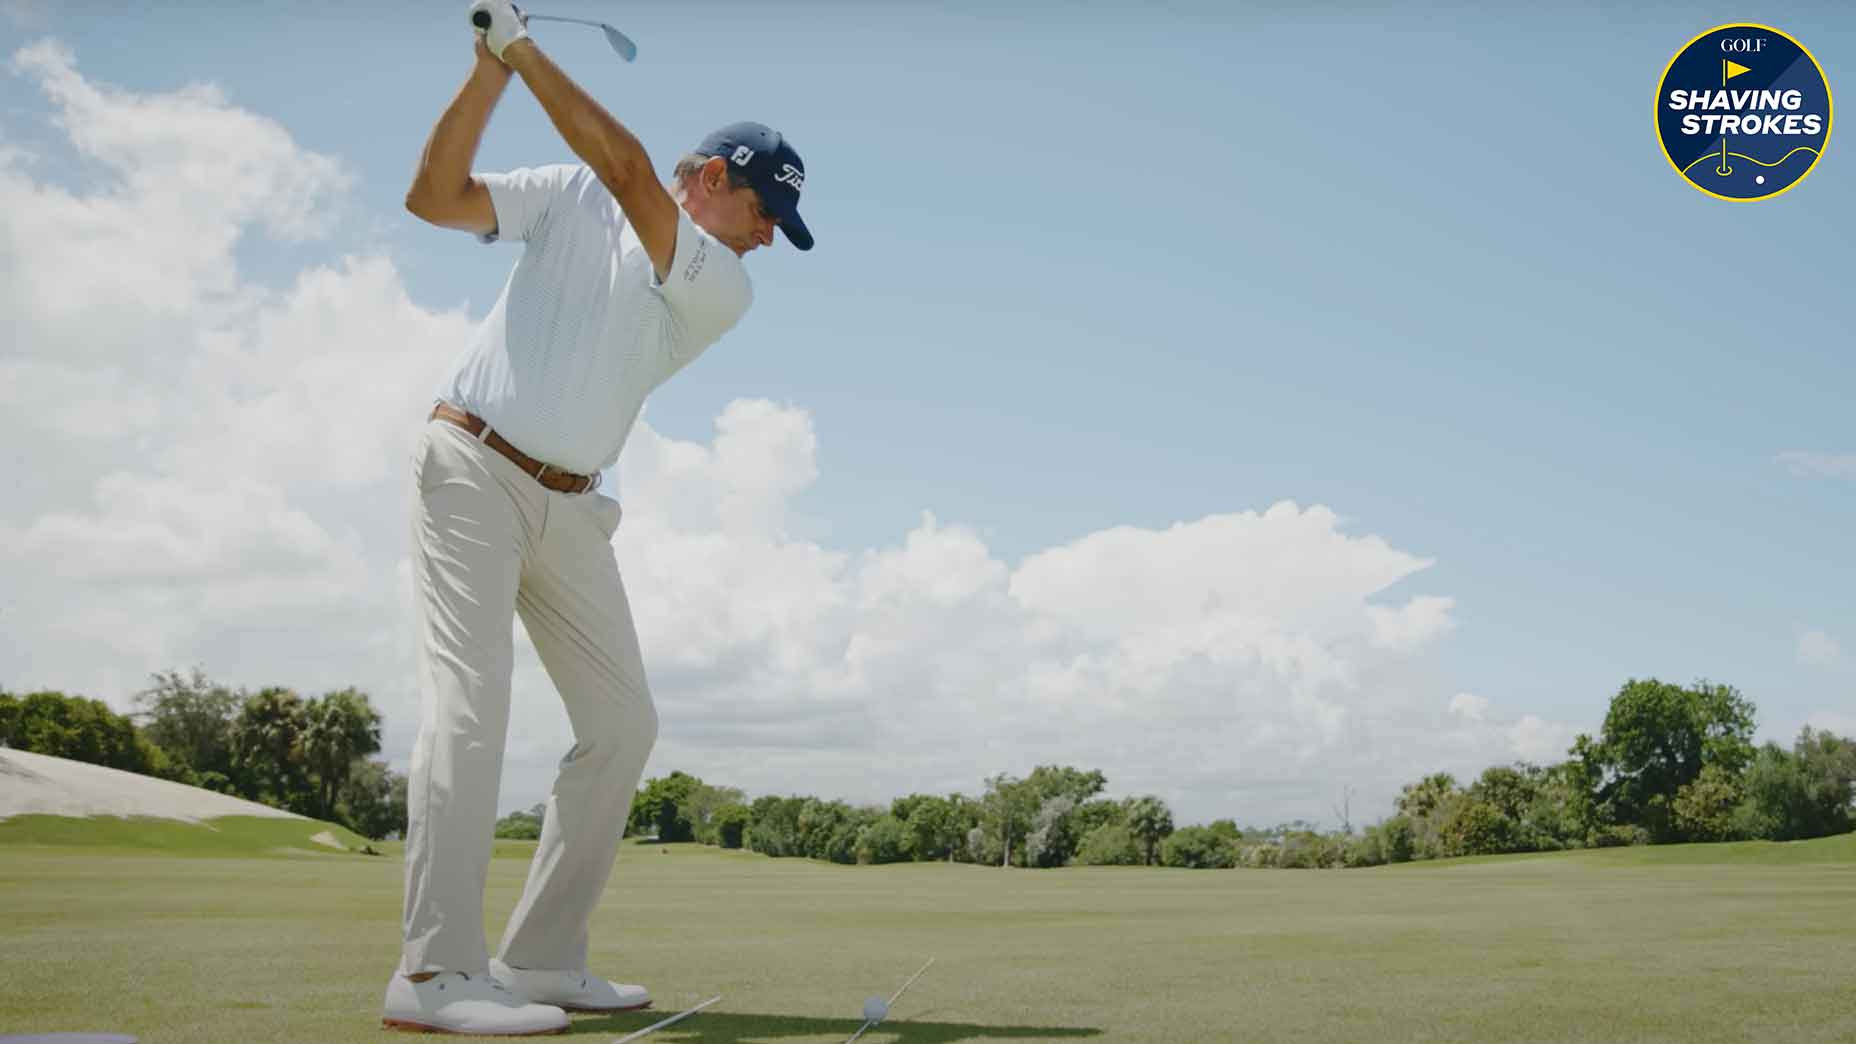 If you're wondering how to compress irons for perfect ball contact, use these tips from GOLF Top 100 Teacher Jason Baile